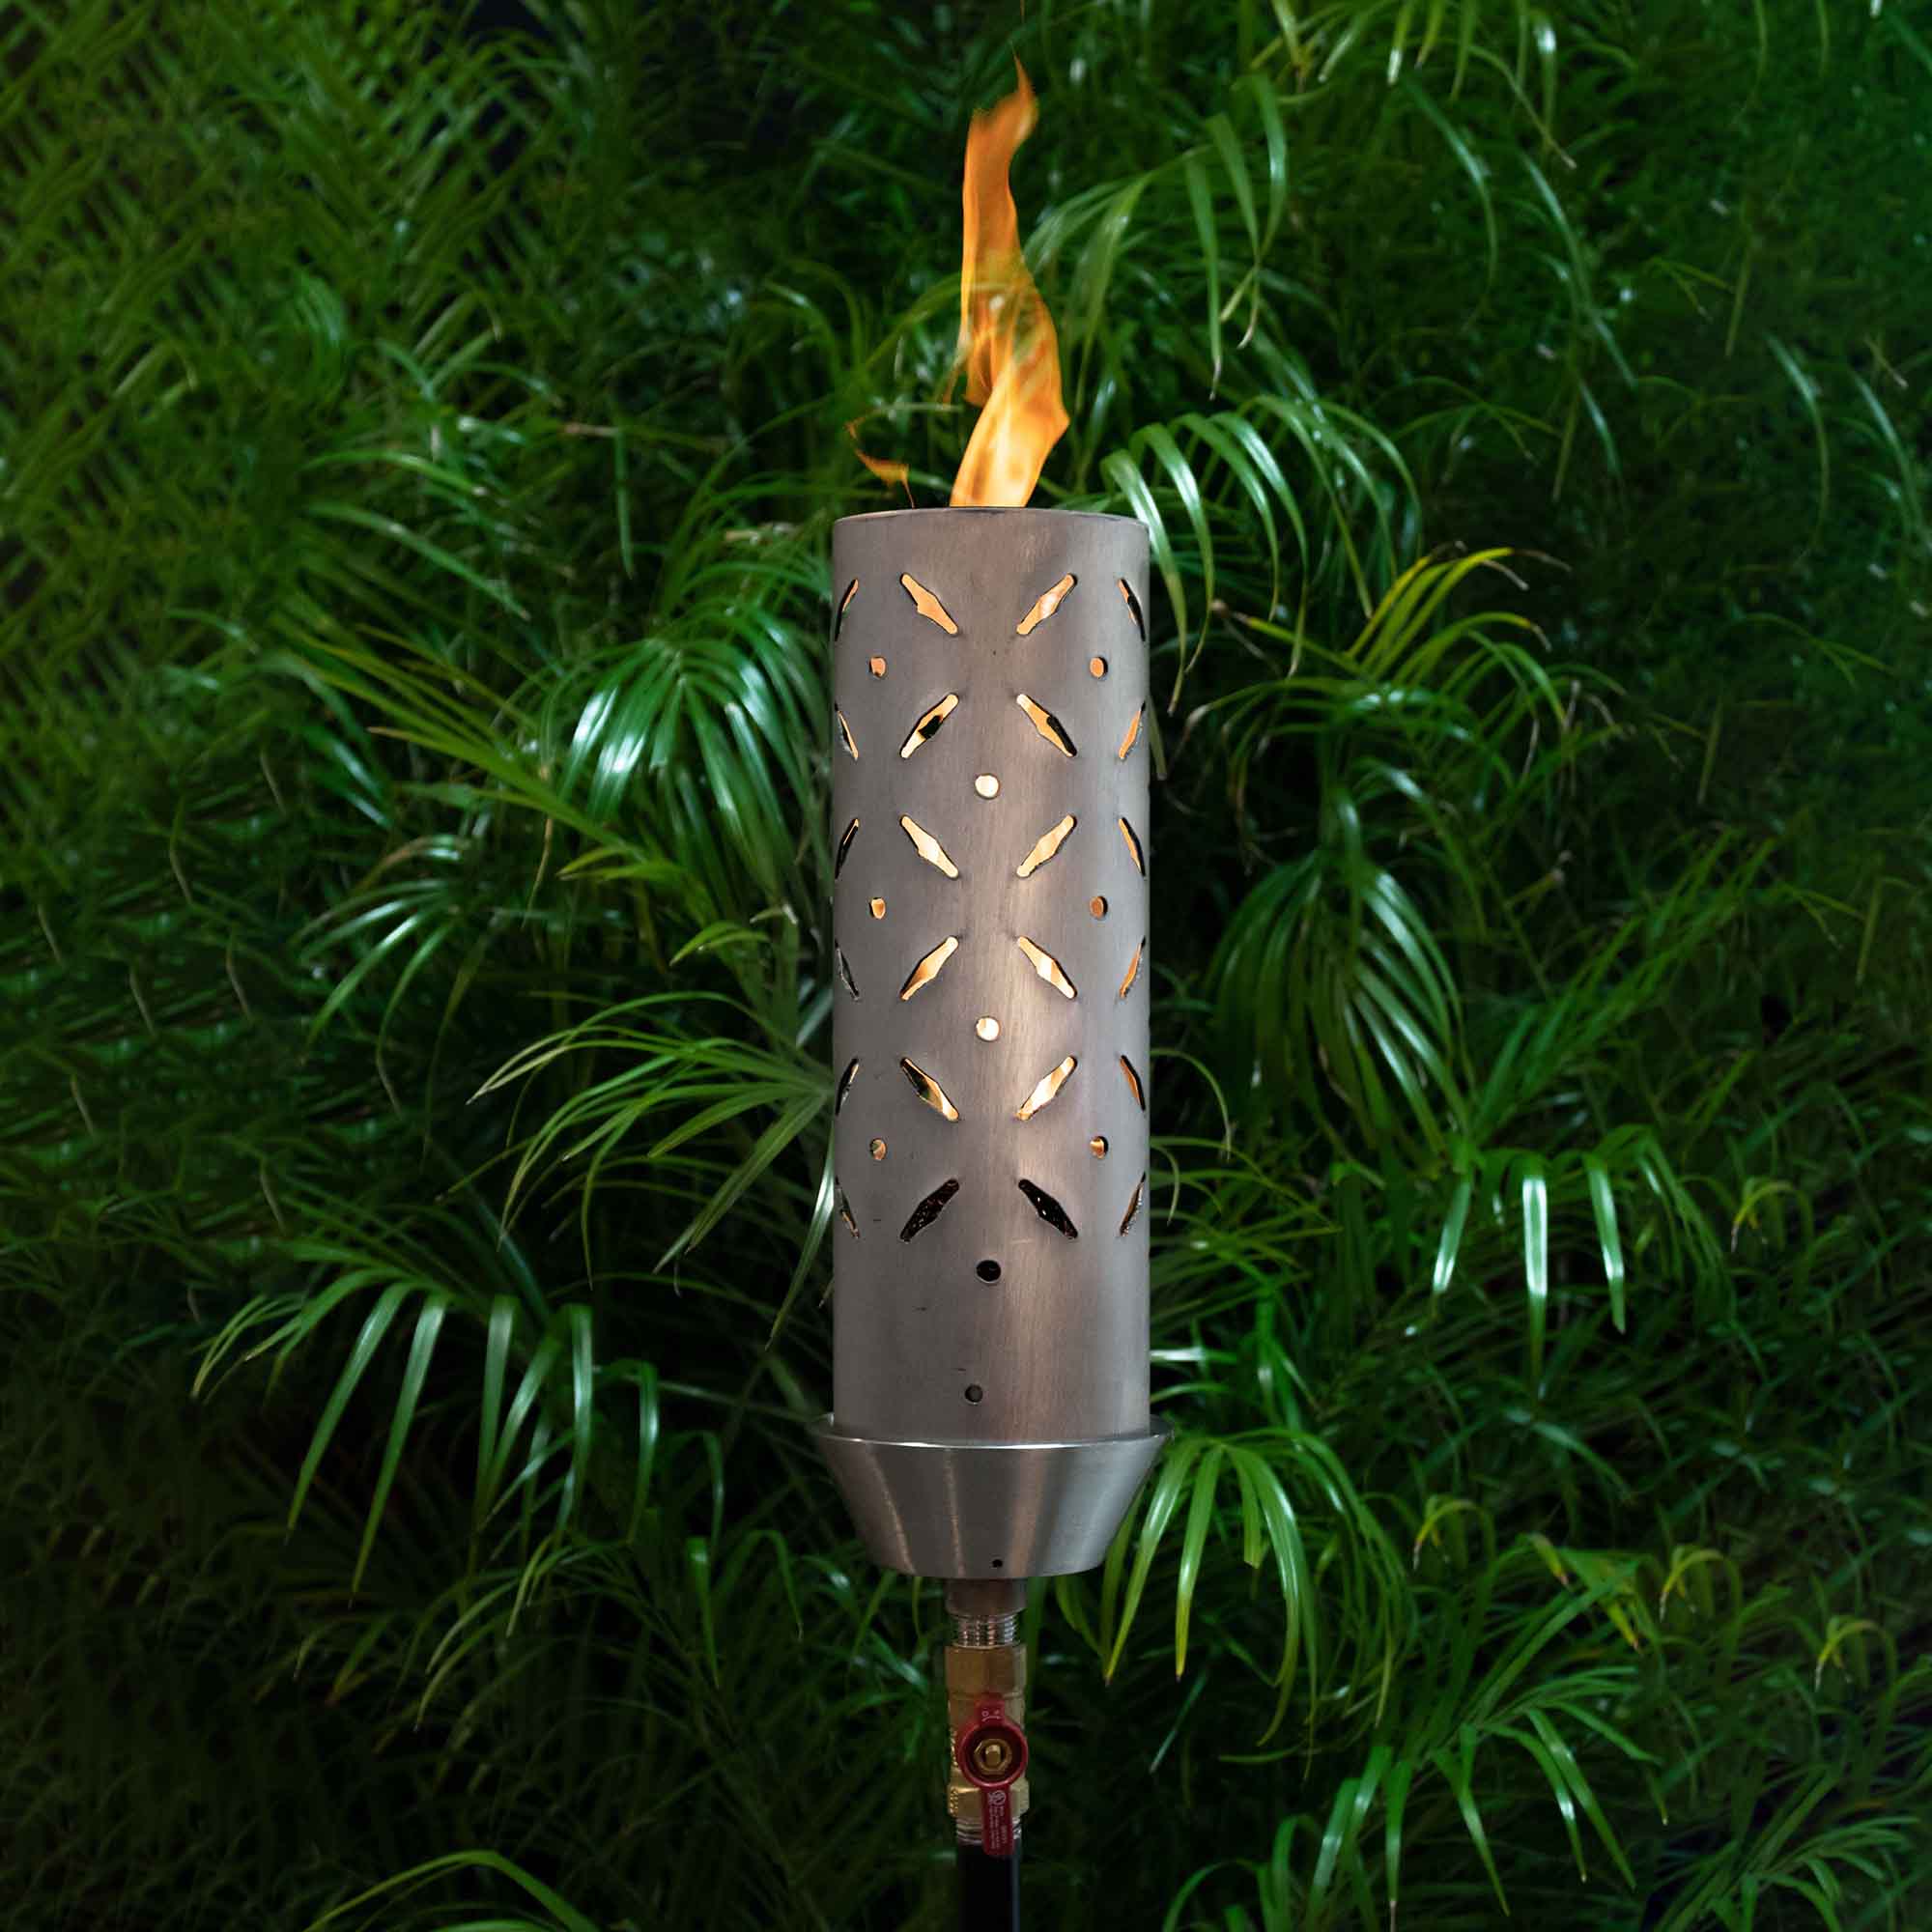 The Outdoor Plus 14" Diamond Stainless Steel Fire Torch